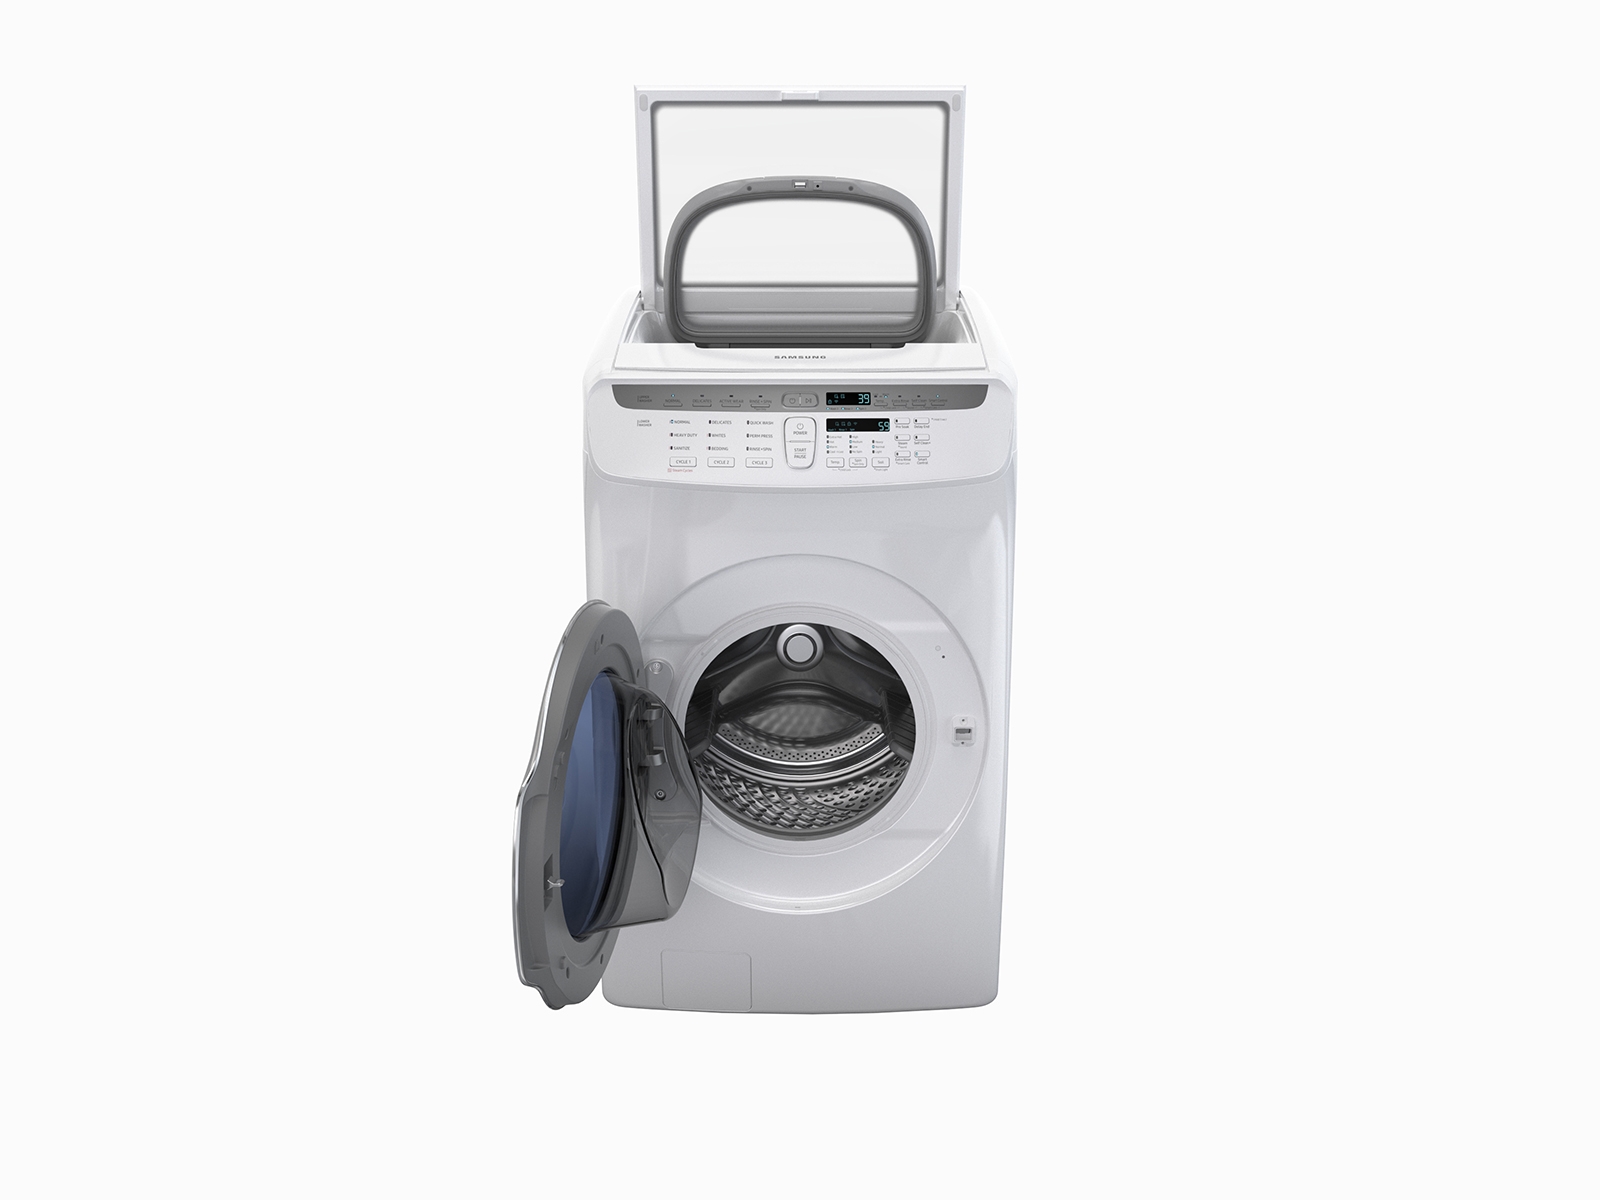 https://image-us.samsung.com/SamsungUS/home/home-appliances/washers/front-load/pd/02152018/wv55m9600aw/360/WV55M9600AW-01.jpg?$product-details-jpg$